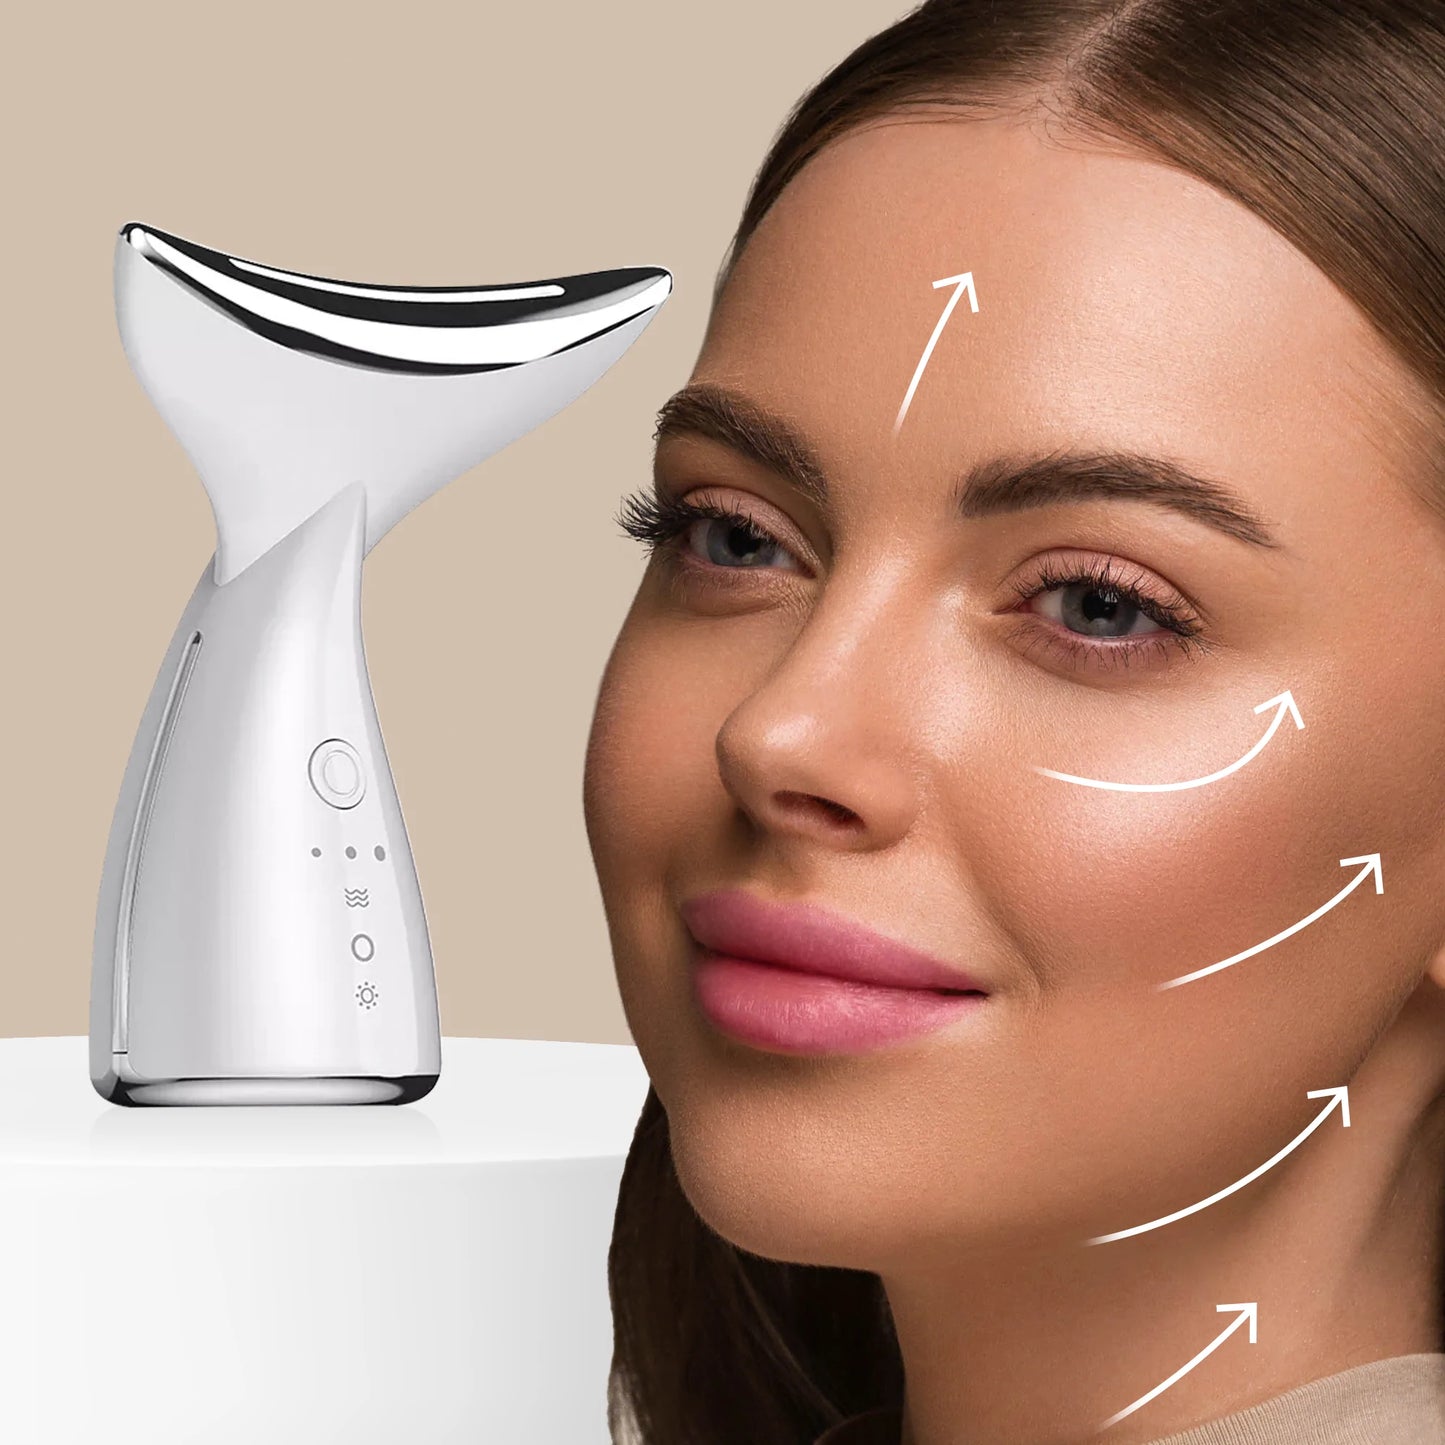 Nutriglow™ Face and Jawline Shaper – NutriGlow™